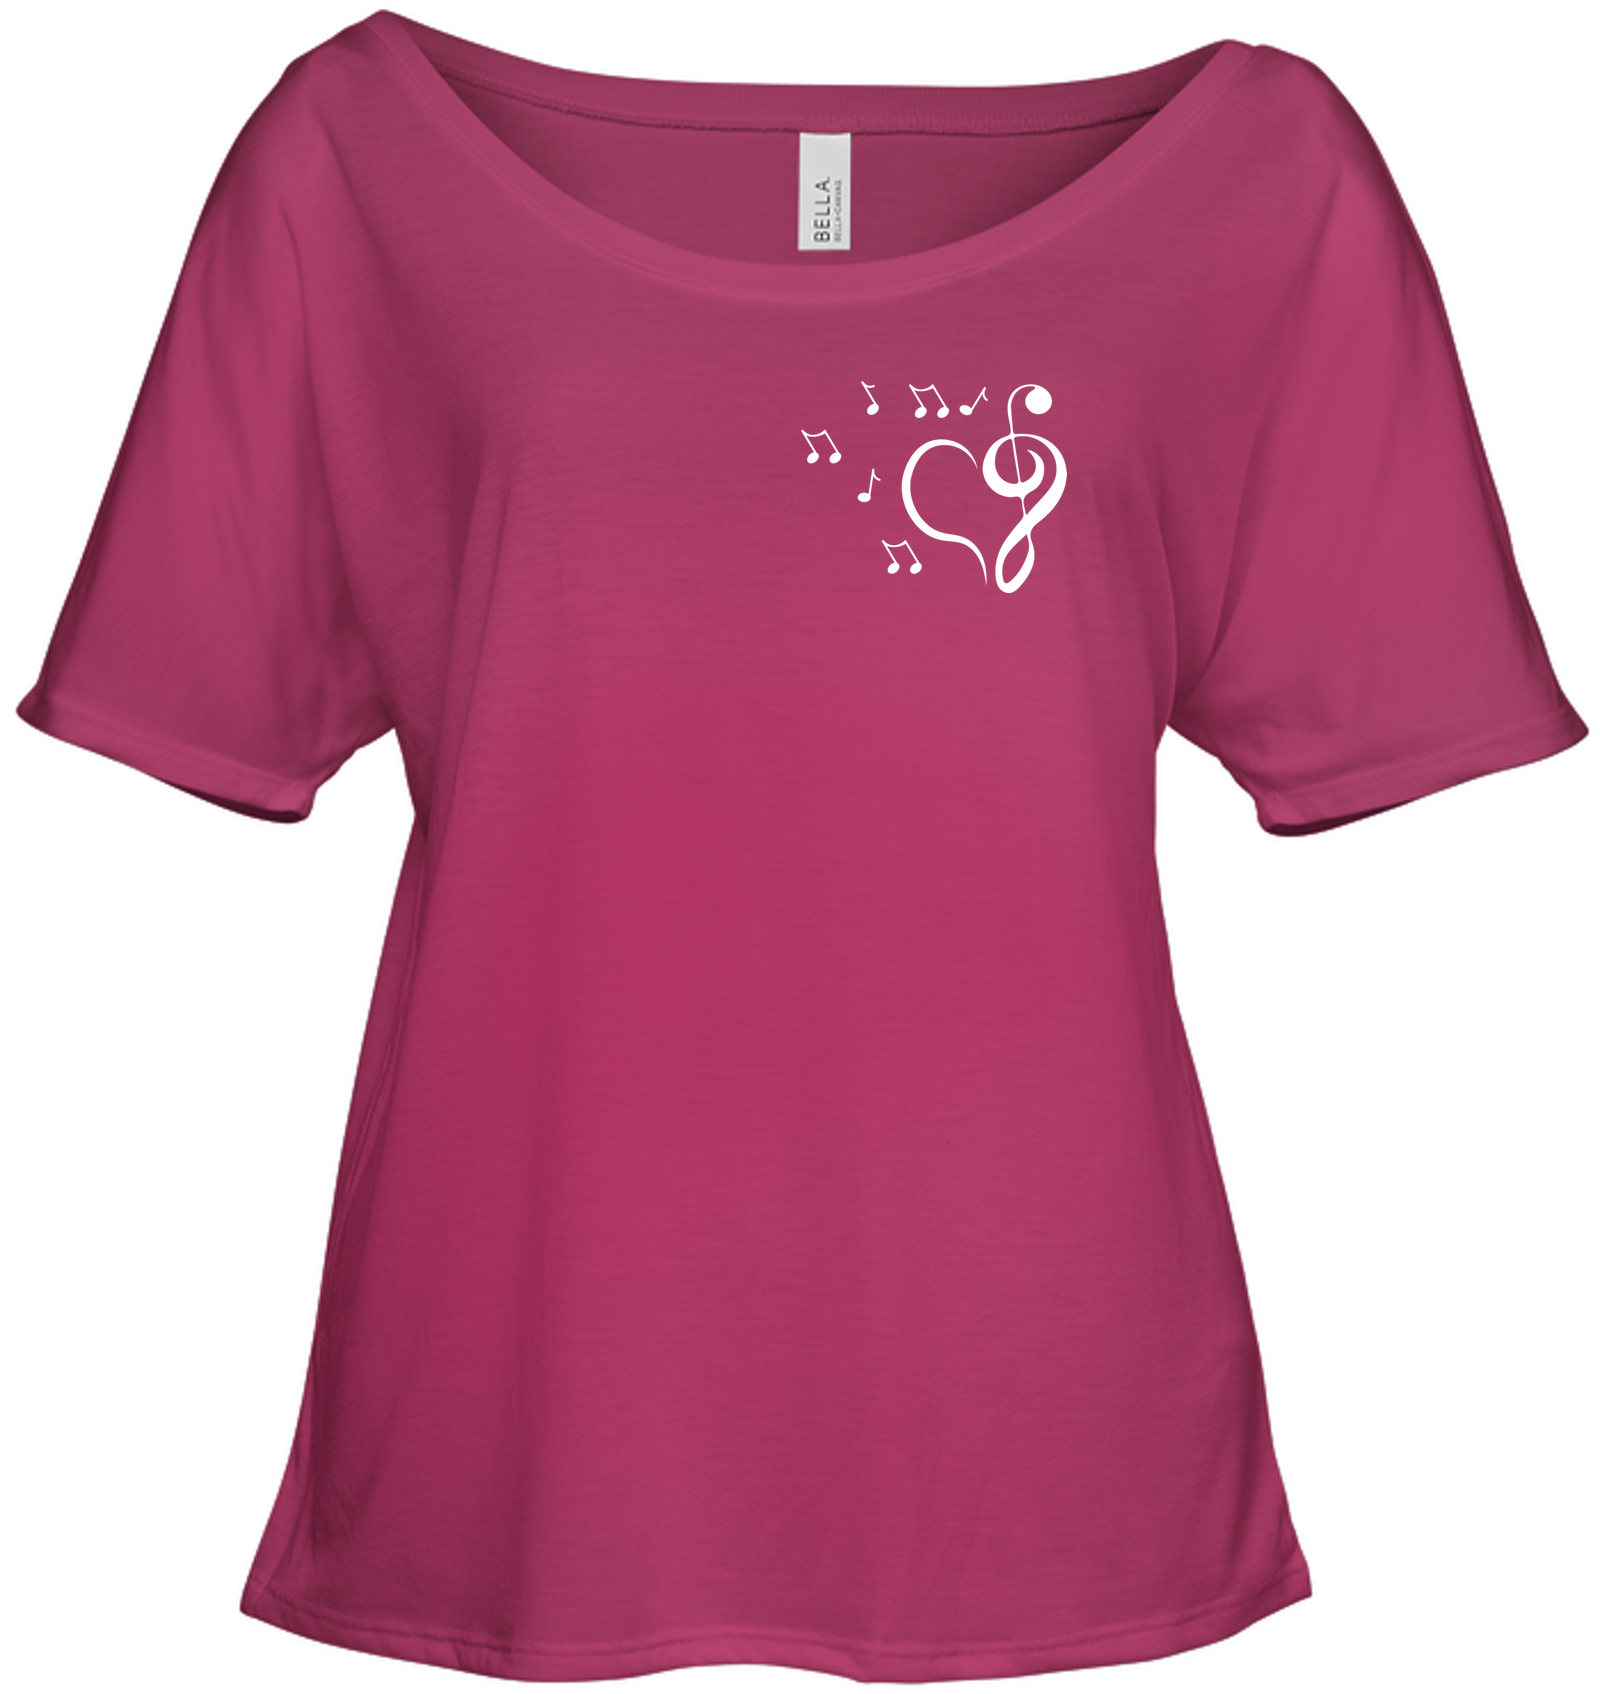 Musical heart with floating notes (Pocket Size)  - Bella + Canvas Women's Slouchy Tee